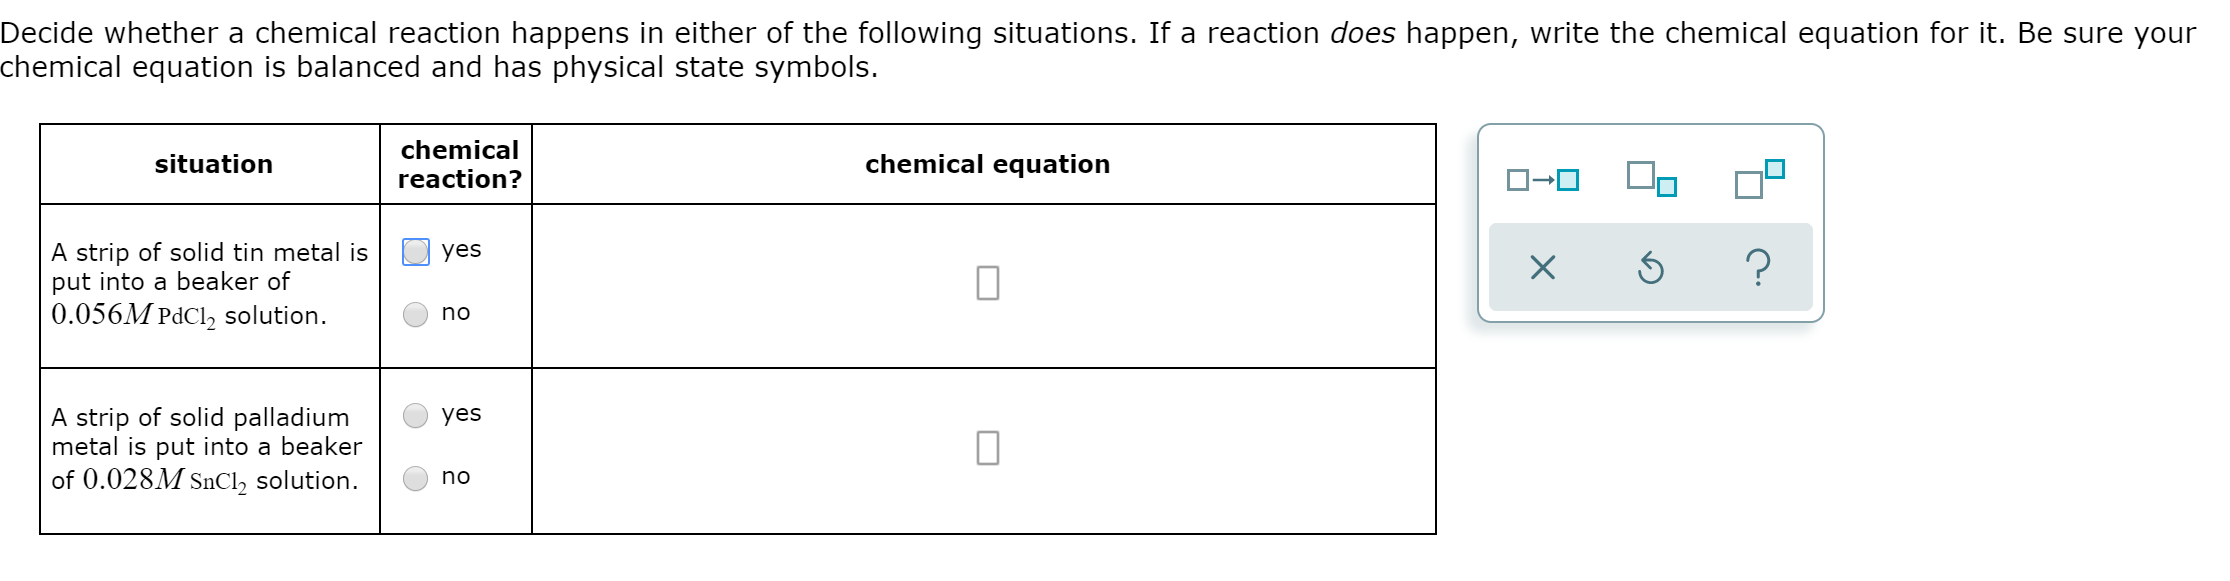 Decide whether a chemical reaction happens in either of the following situations. If a reaction does happen, write the chemical equation for it. Be sure your
chemical equation is balanced and has physical state symbols.
chemical
chemical equation
situation
reaction?
A strip of solid tin metal is
put into a beaker of
0.056M PdCl2 solution
yes
?
X
no
A strip of solid palladium
metal is put into a beaker
of 0.028M SnCl2 solution
yes
no
